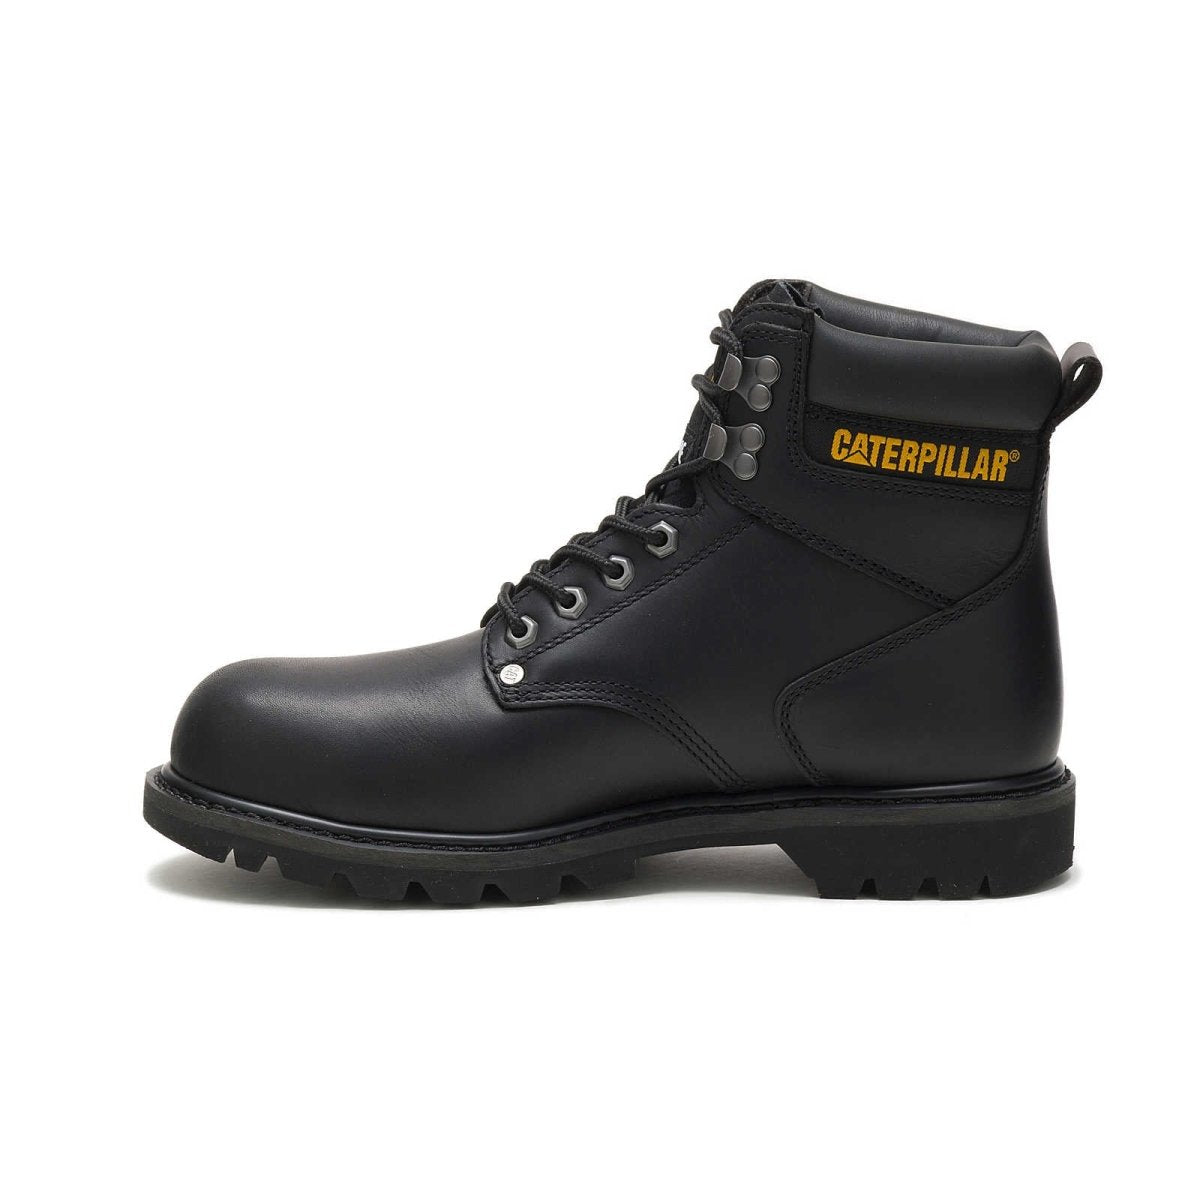 CATERPILLAR SECOND SHIFT STEEL TOE MEN'S WORK BOOT (P89135) IN BLACK - TLW Shoes